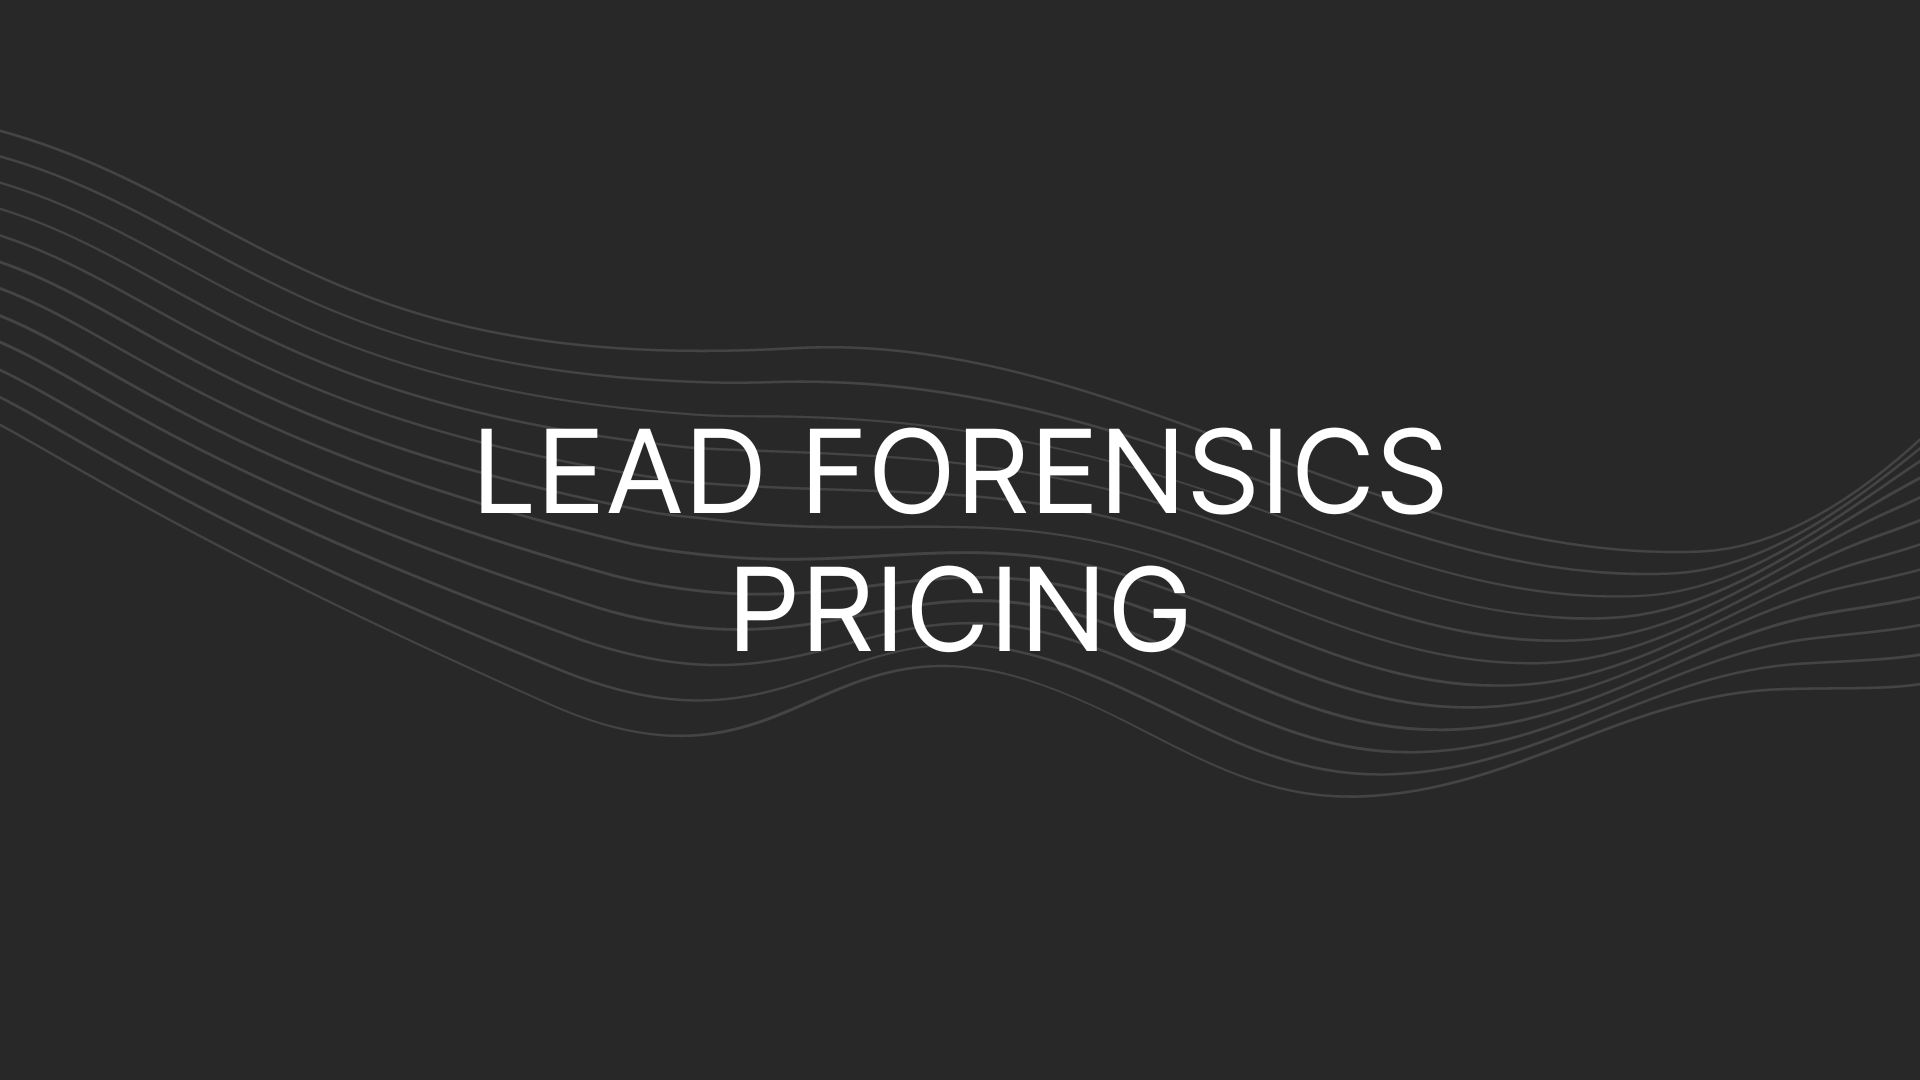 Lead Forensics Pricing